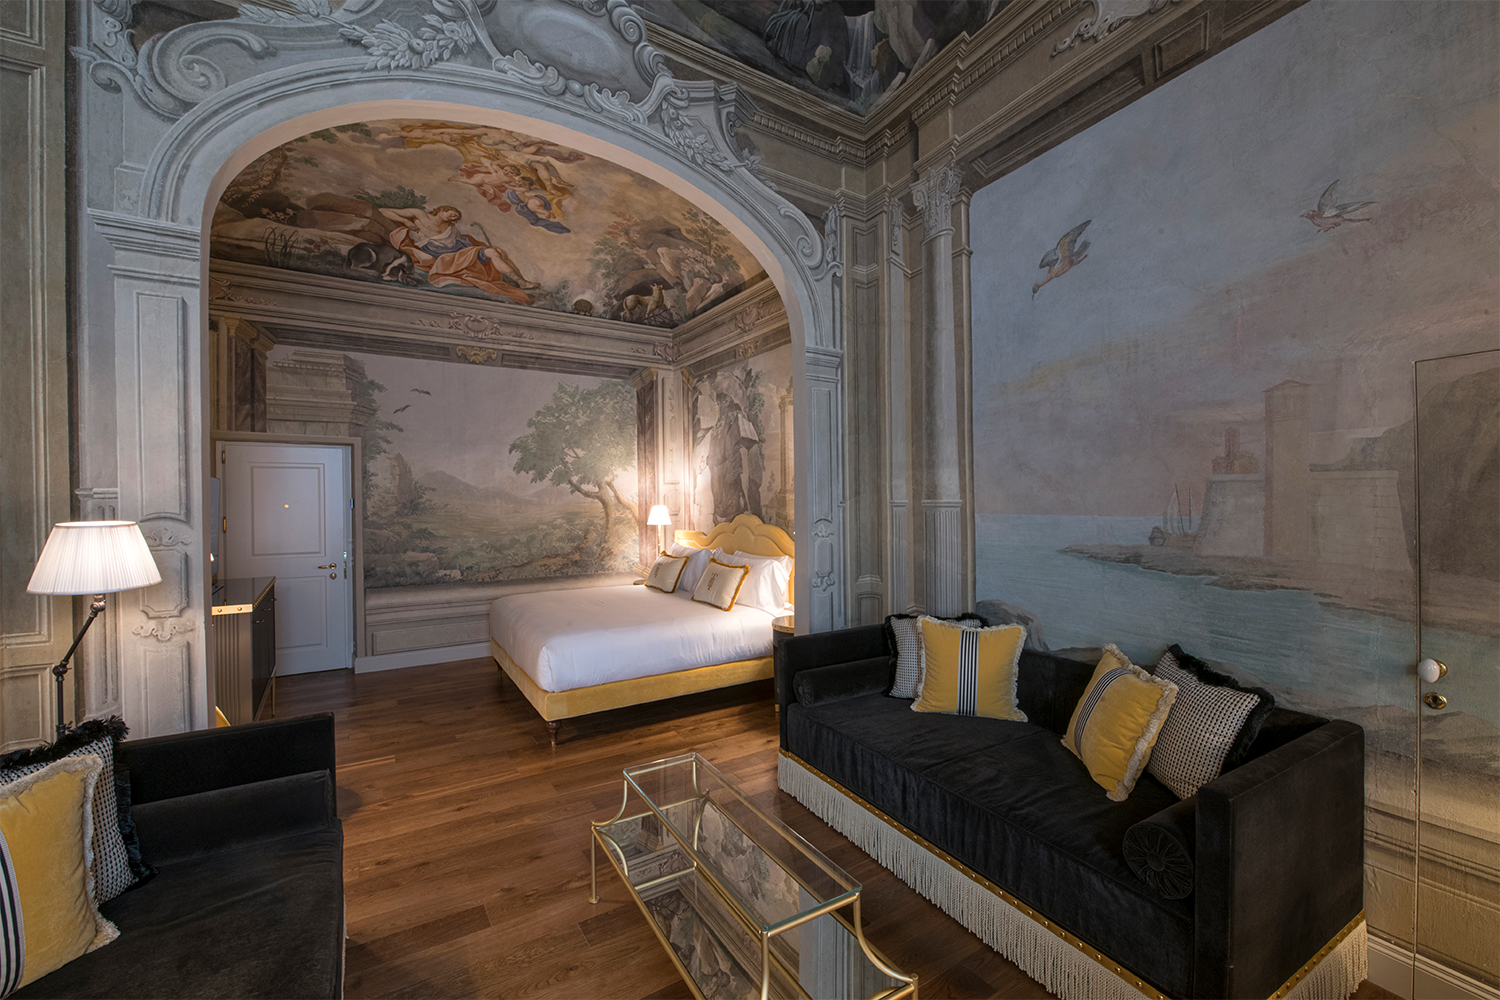 A room at Il Tornabuoni, a new hotel in Florence, Italy, in a converted palace